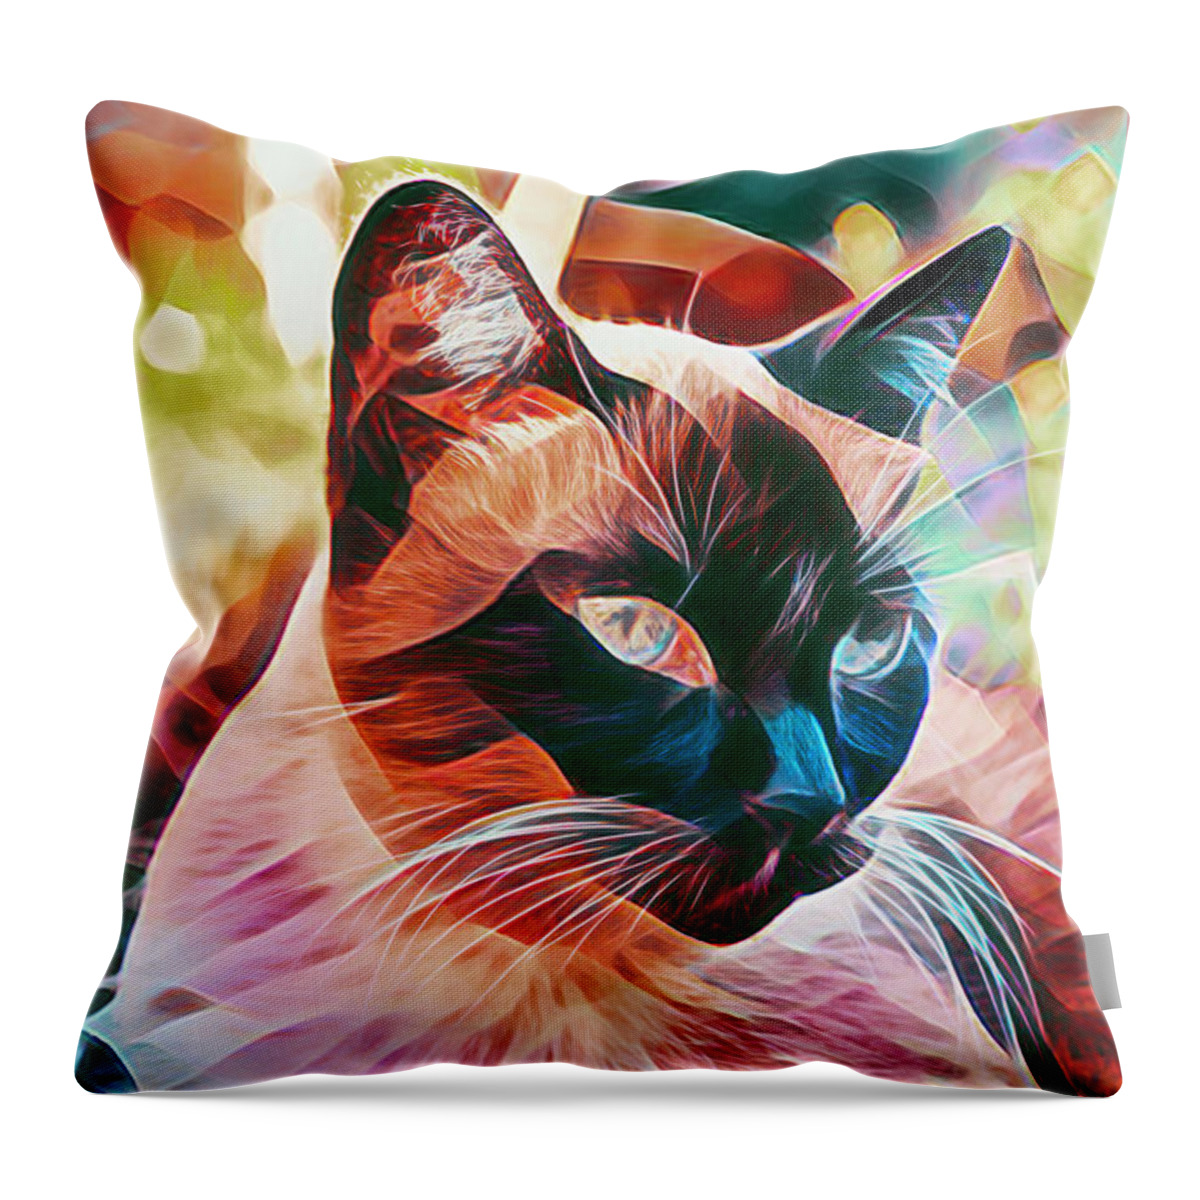 Cat Throw Pillow featuring the digital art Siamese Cat Abstract by Her Arts Desire